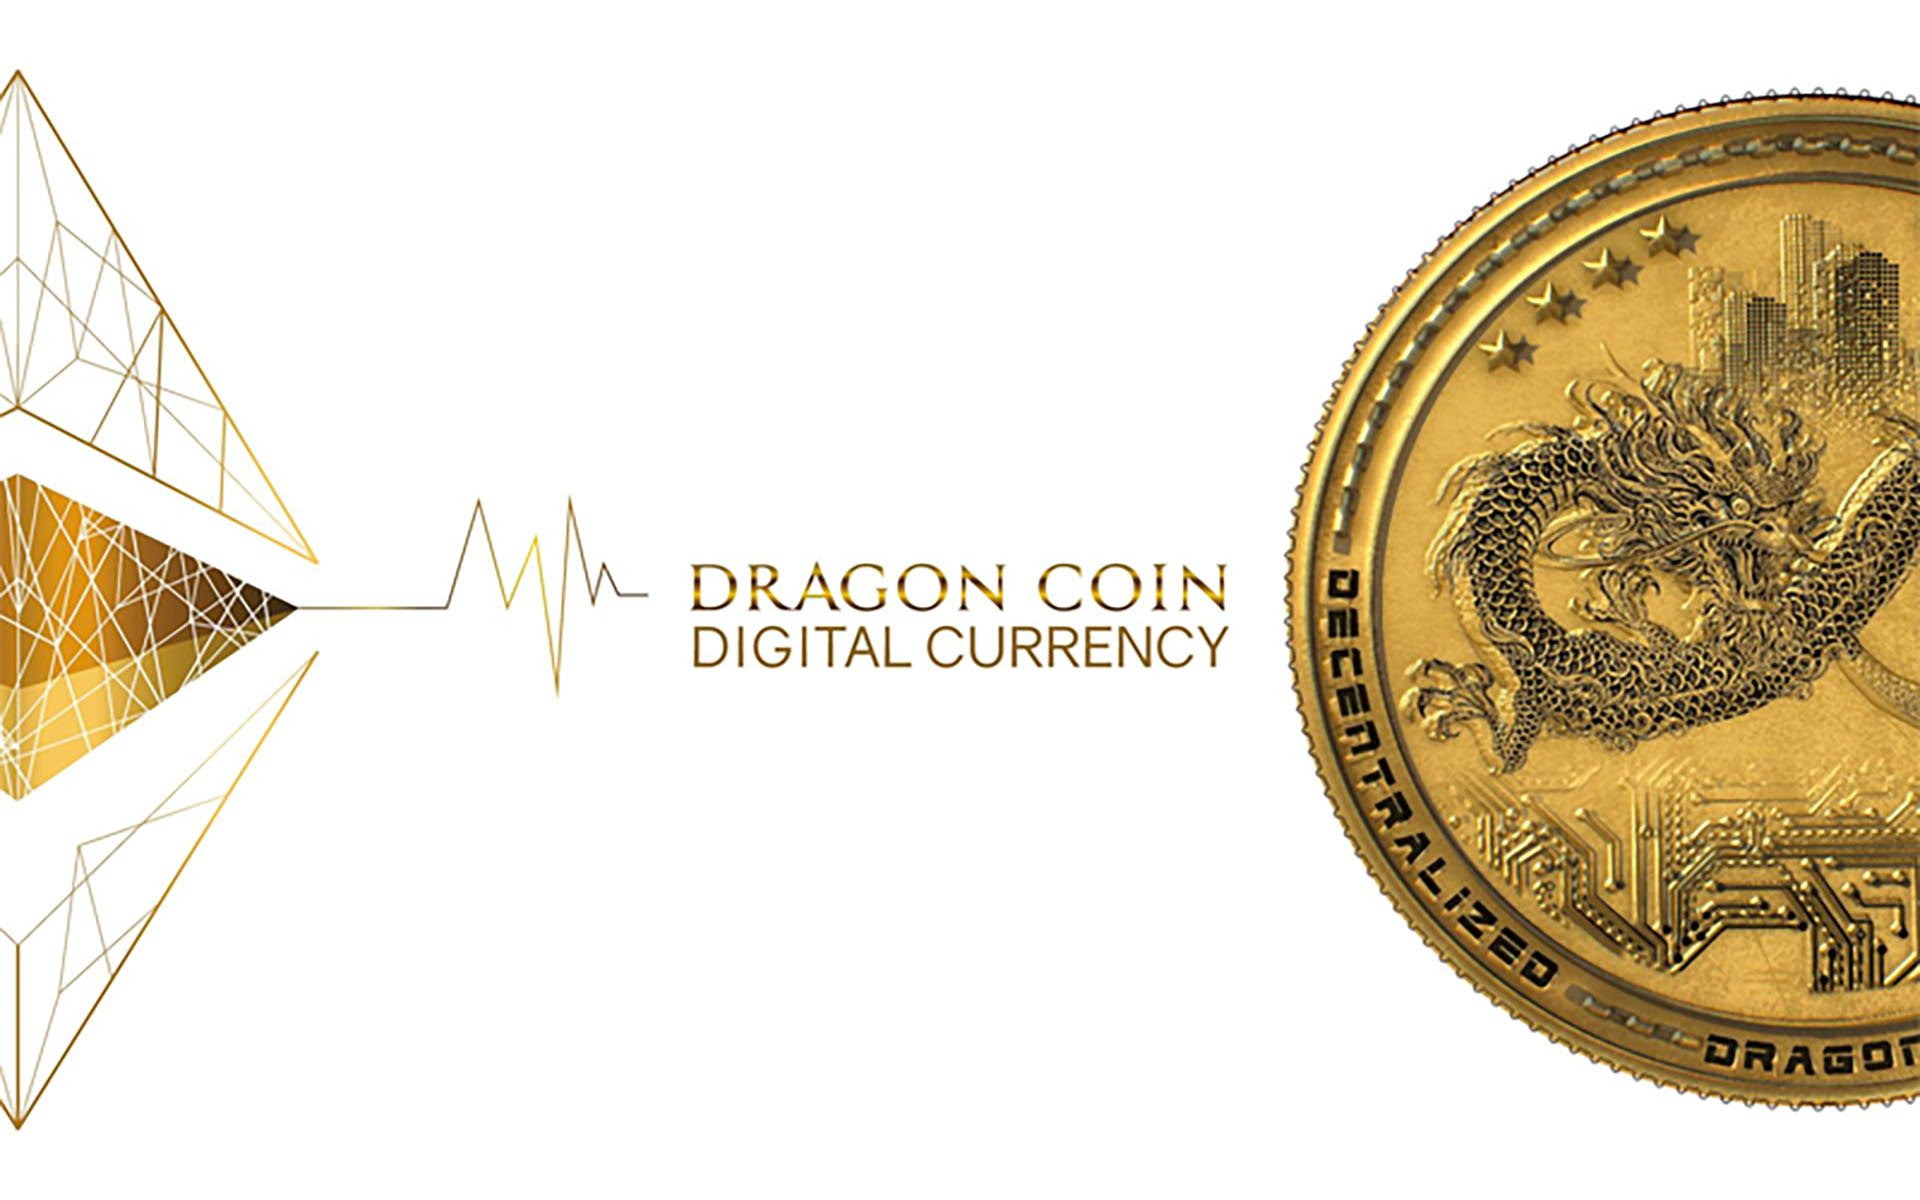 Dragon Inc is On Course to Complete World’s Largest ICO